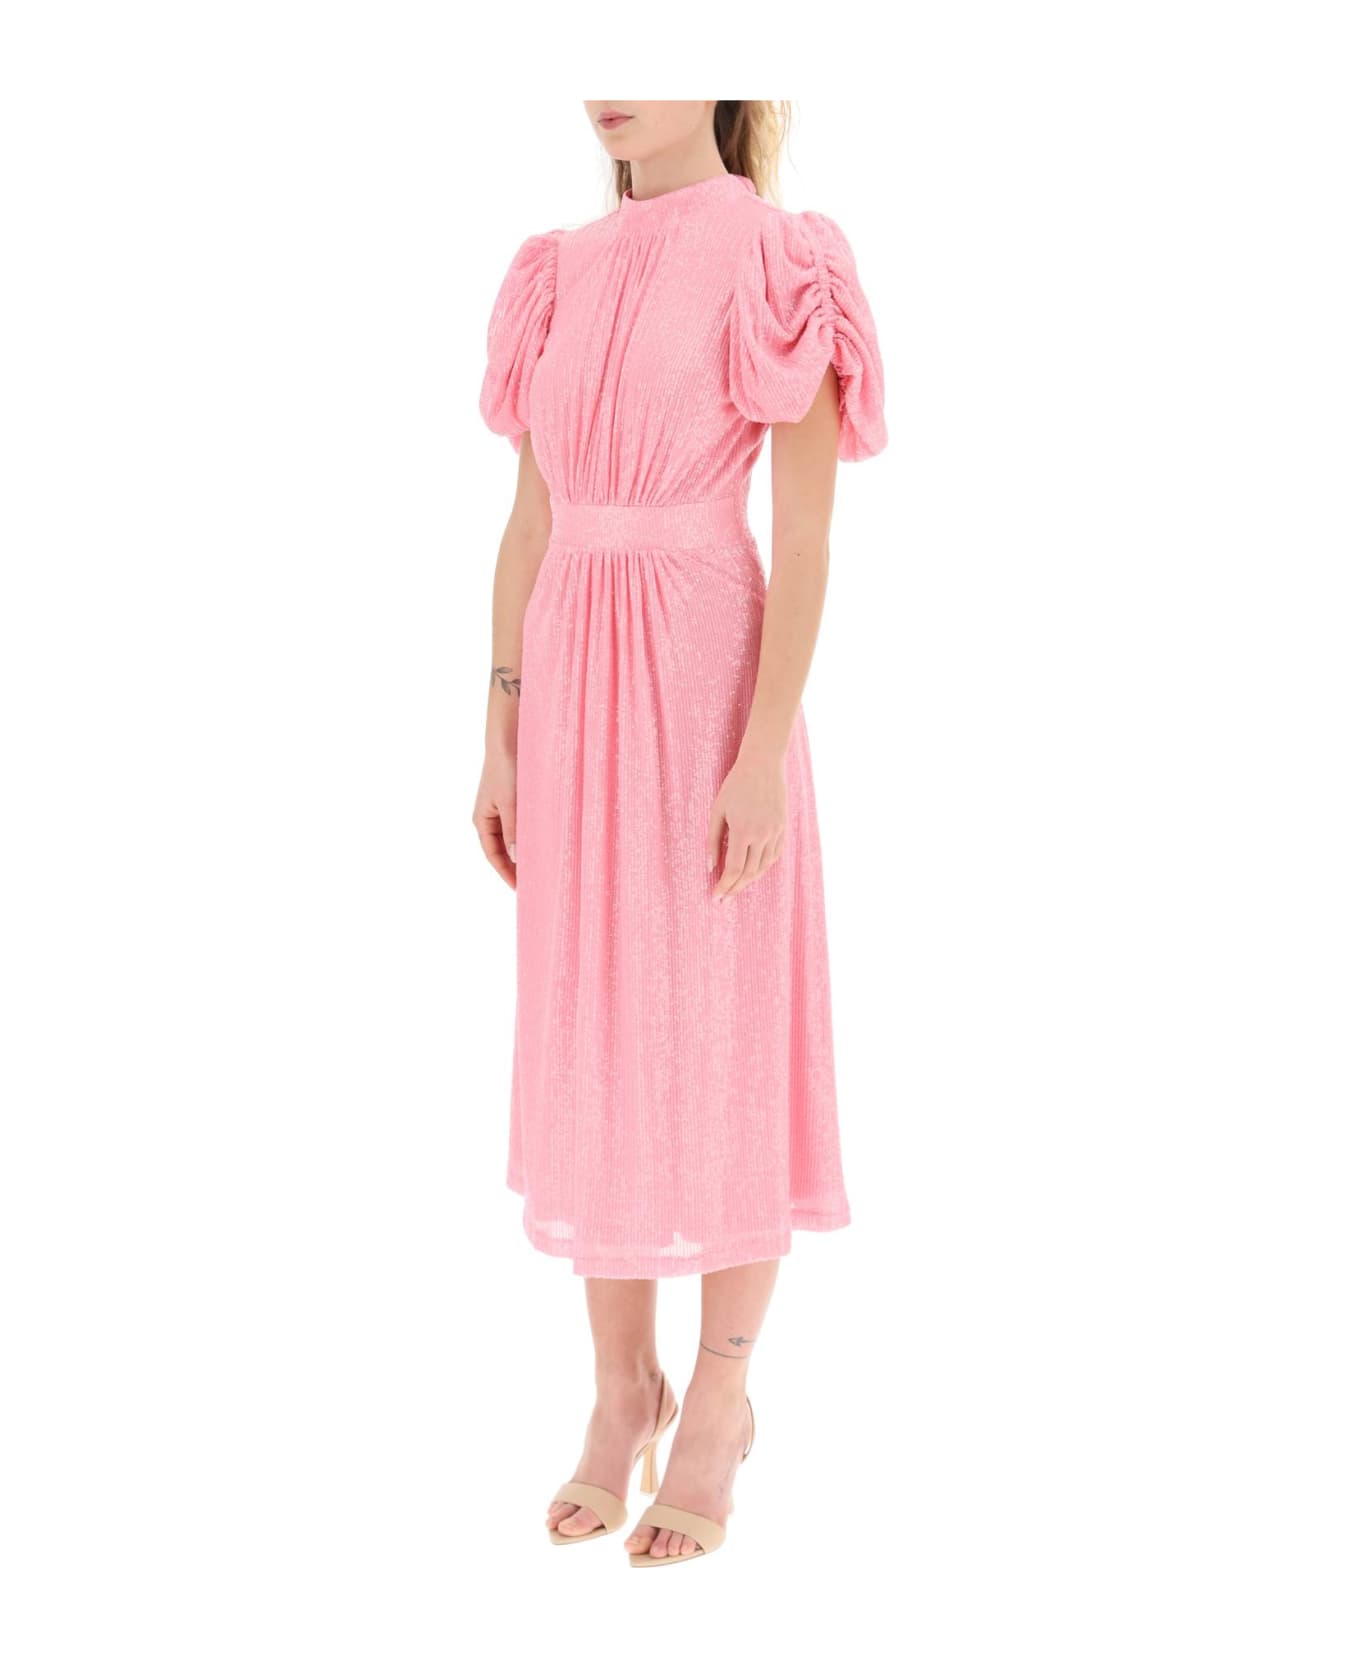 Rotate by Birger Christensen 'noon' Puff Sleeve Sequined Dress - BEGONIA PINK (Pink)